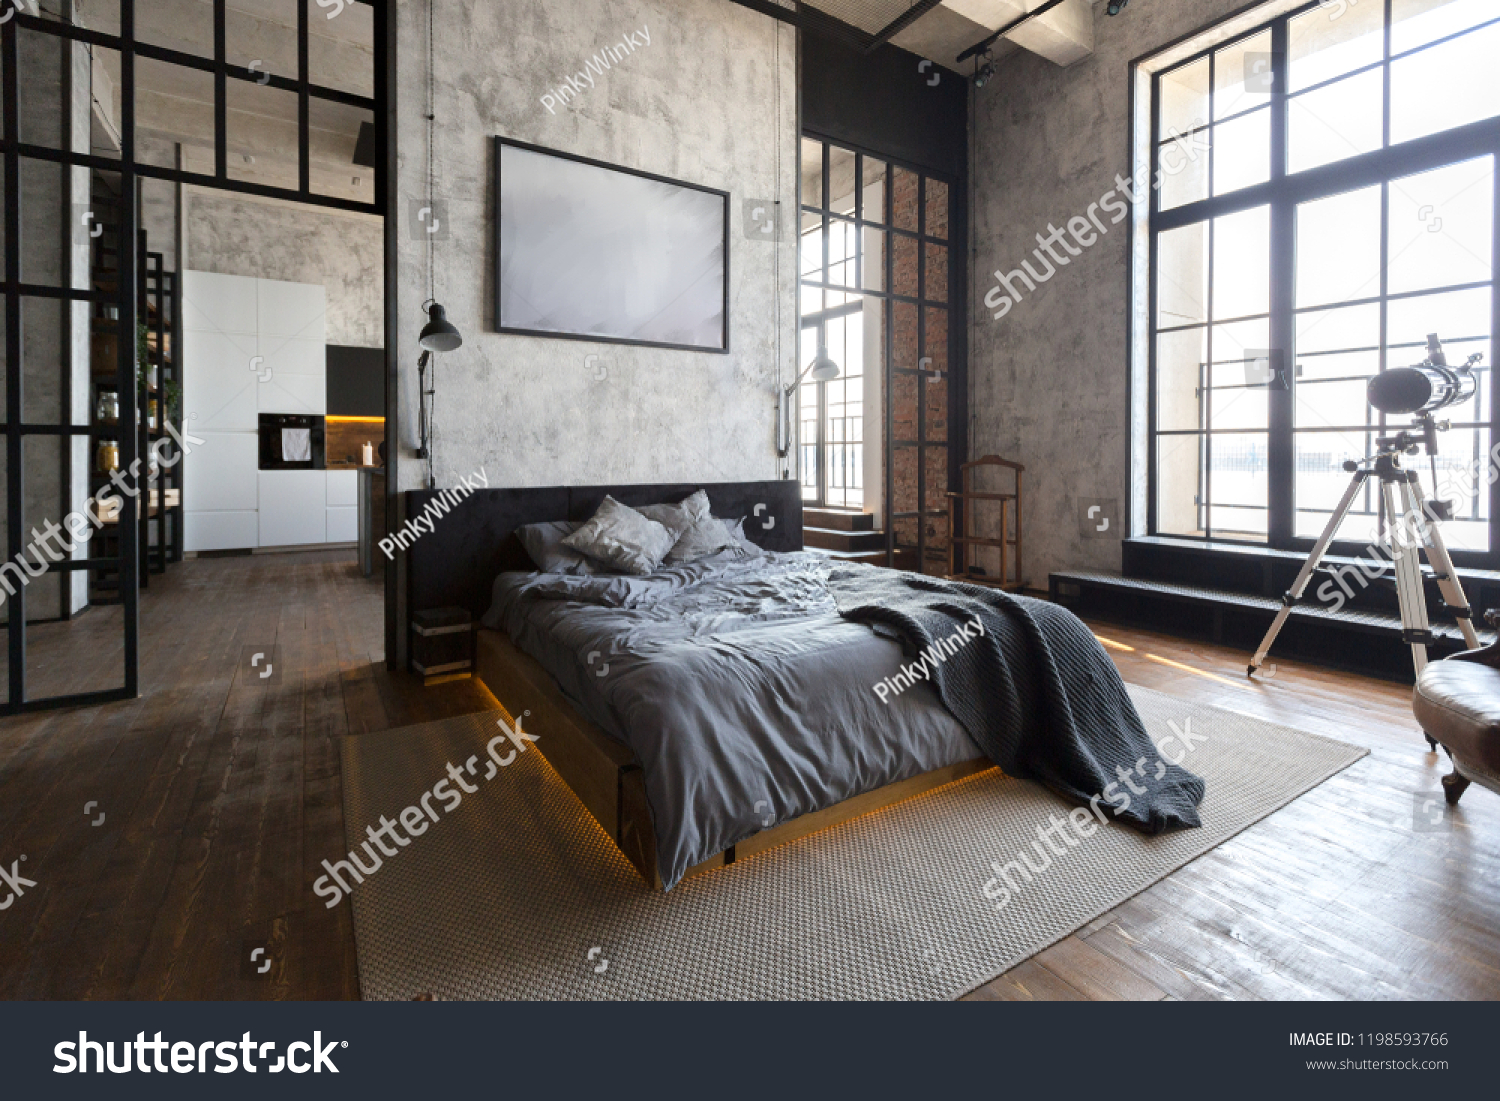 luxury studio apartment with a free layout in a loft style in dark colors. Stylish modern kitchen area with an island, cozy bedroom area with fireplace and personal gym #1198593766